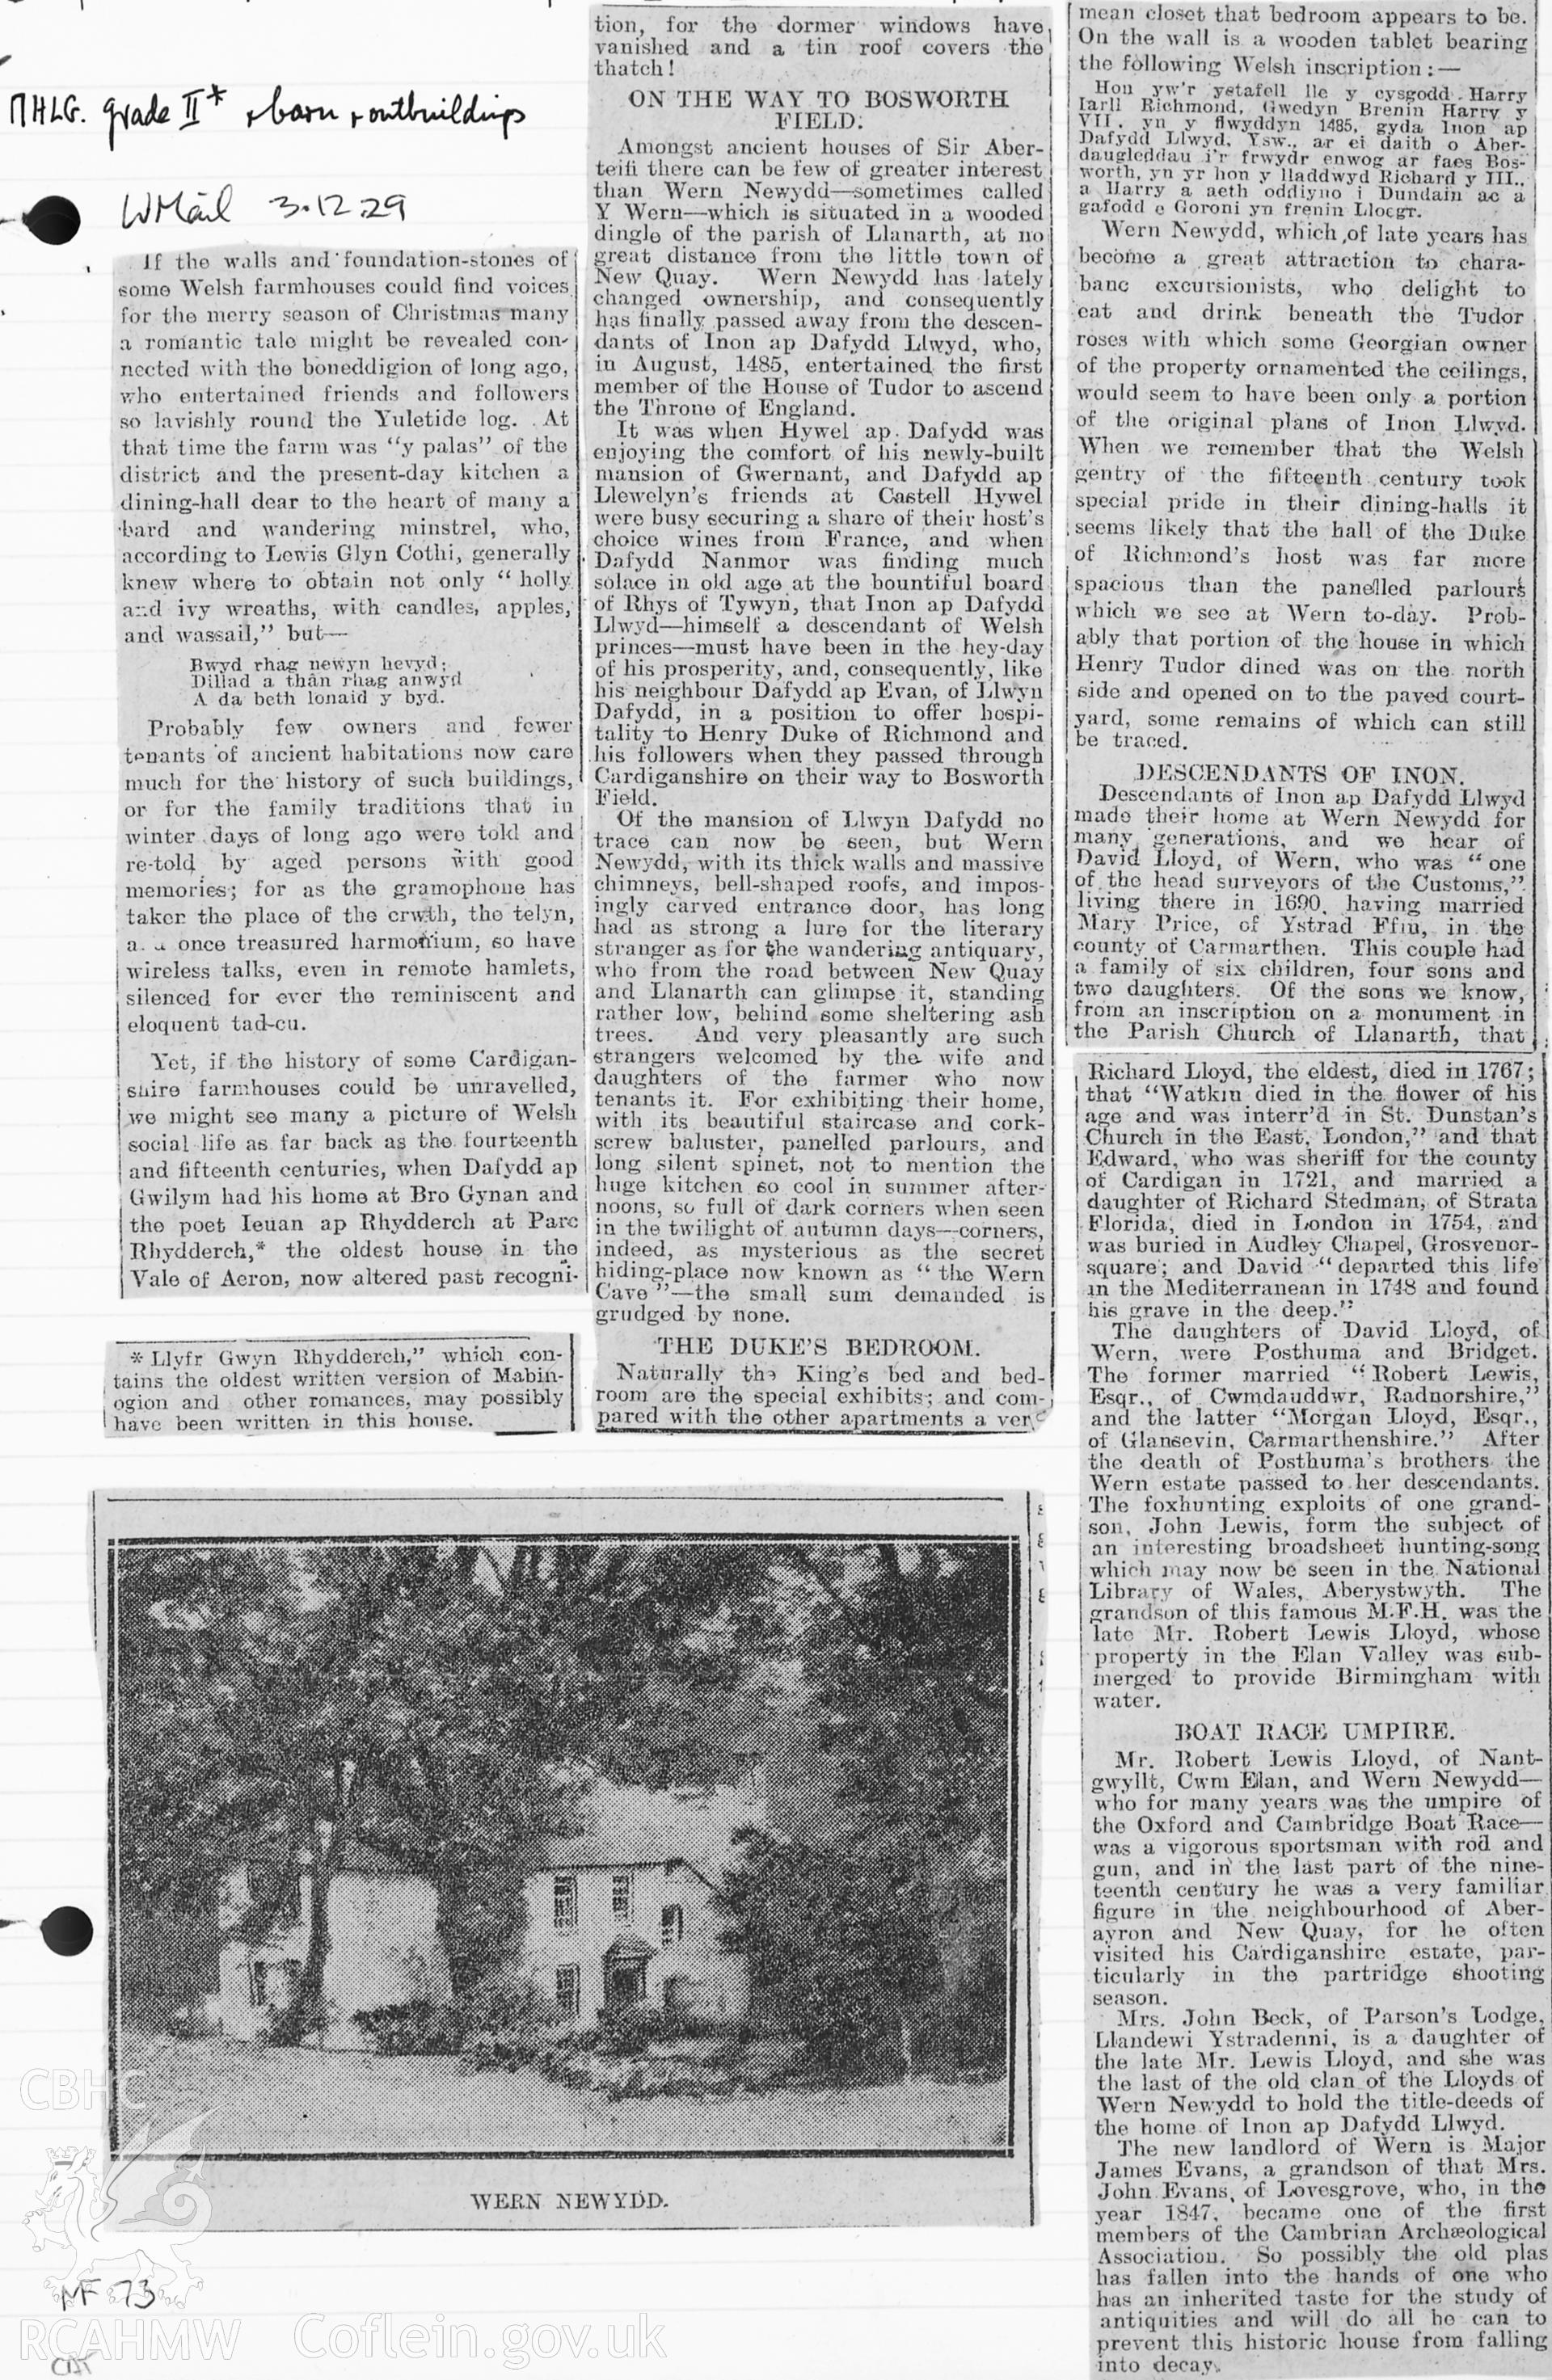 A newspaper extract that gives a short description and history of Wern Newydd Mansion, Llanarth. It links the mansion with Henry Tudor. The photo is of the exterior of the house.